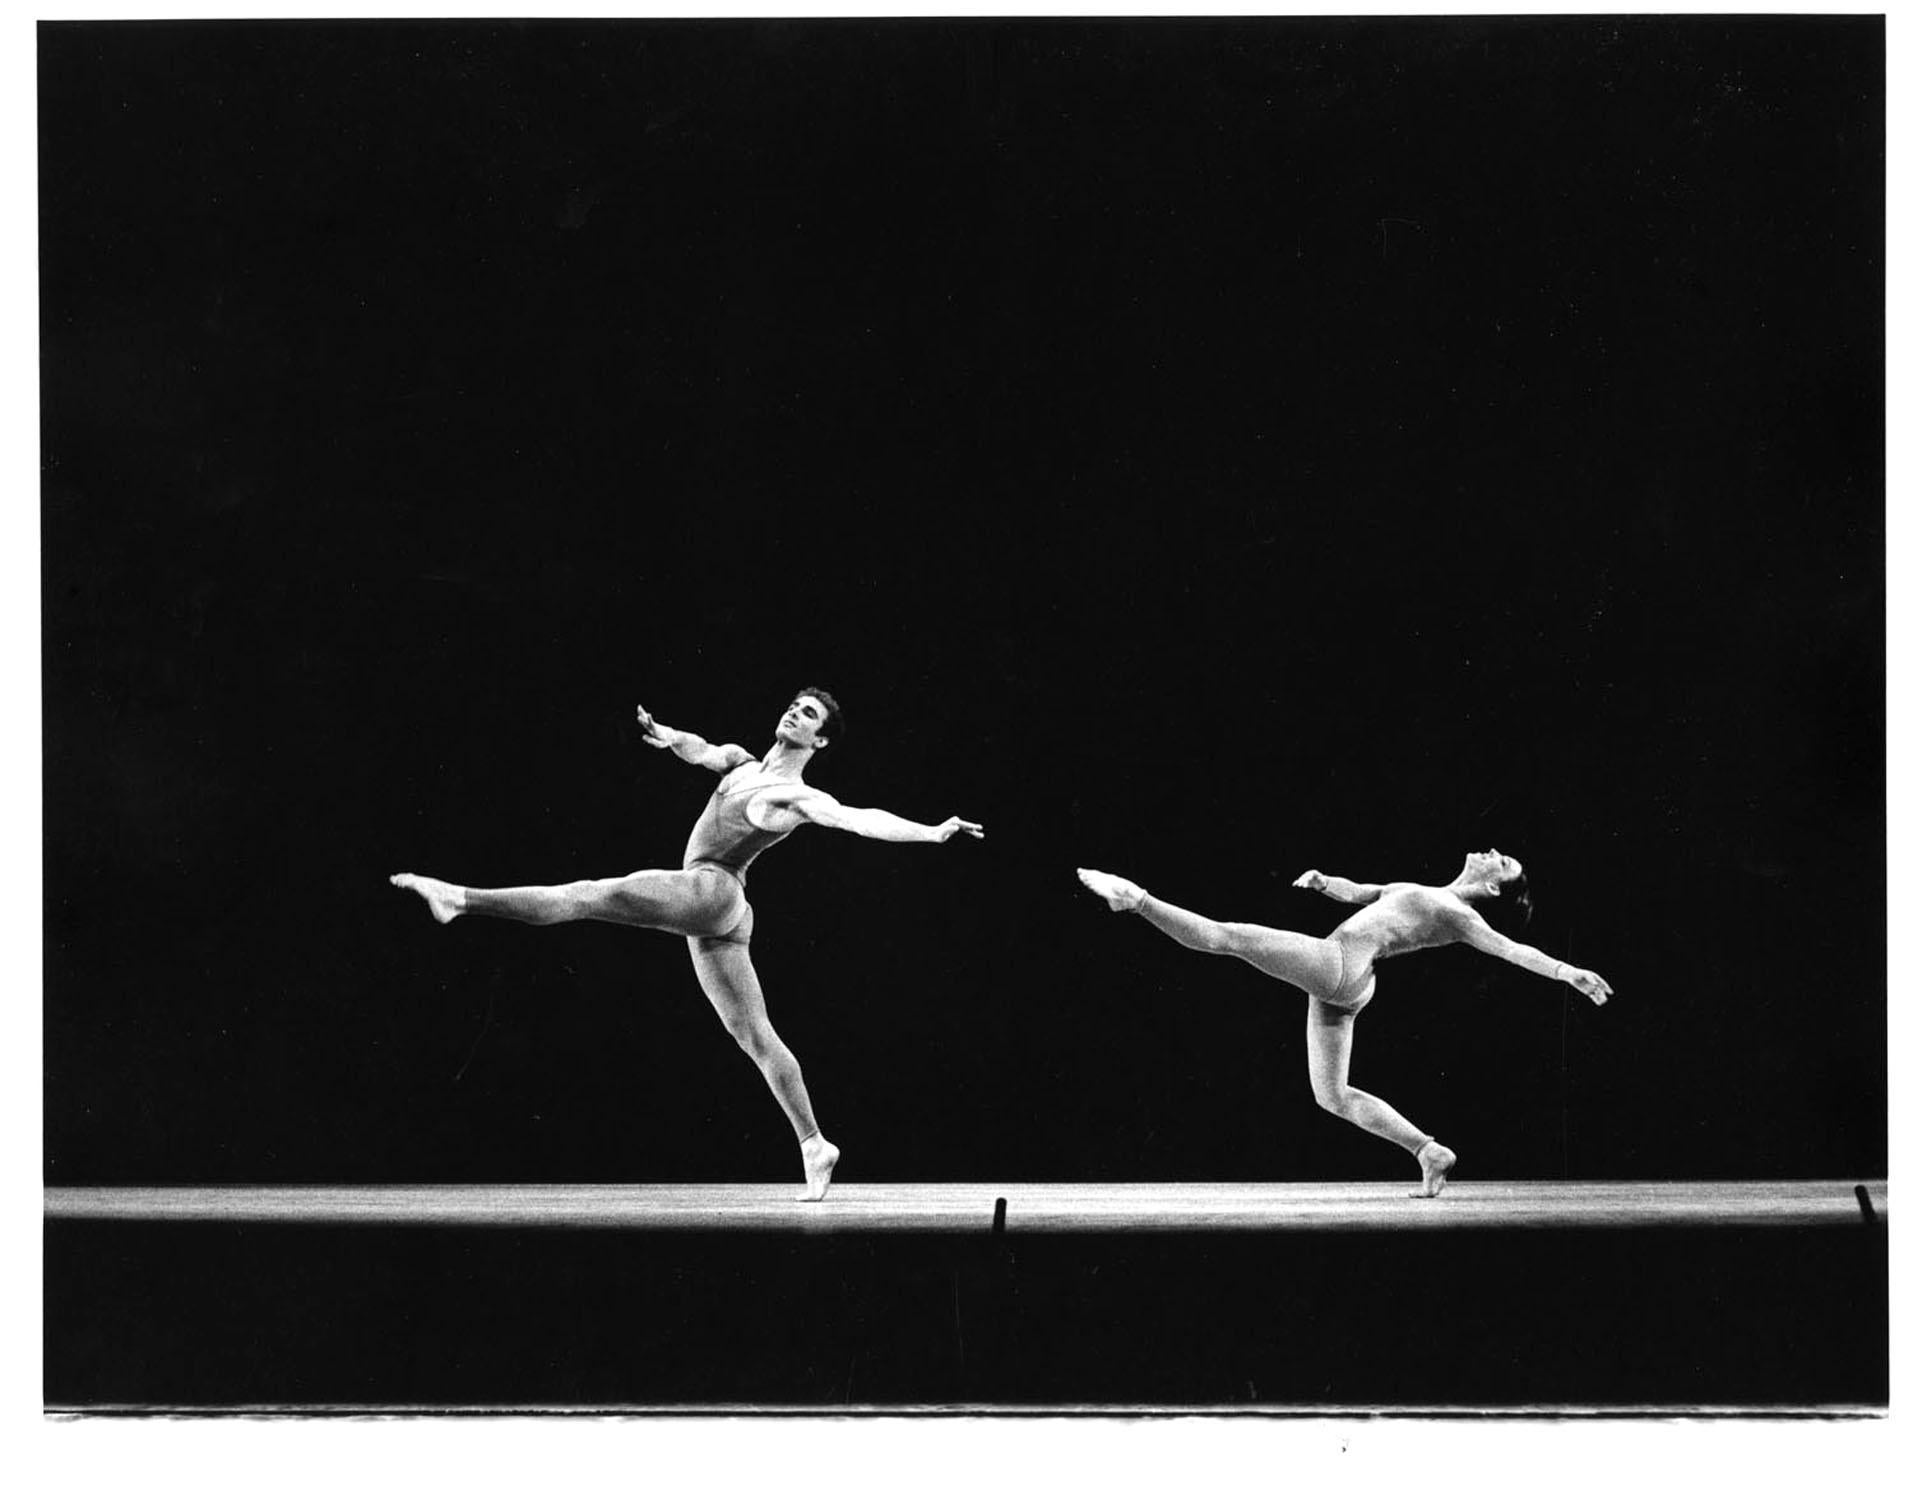 Jack Mitchell Black and White Photograph - Louis Falco, Betty Jones in Jose Limon's 'Choreographic Offering' signed by Jack